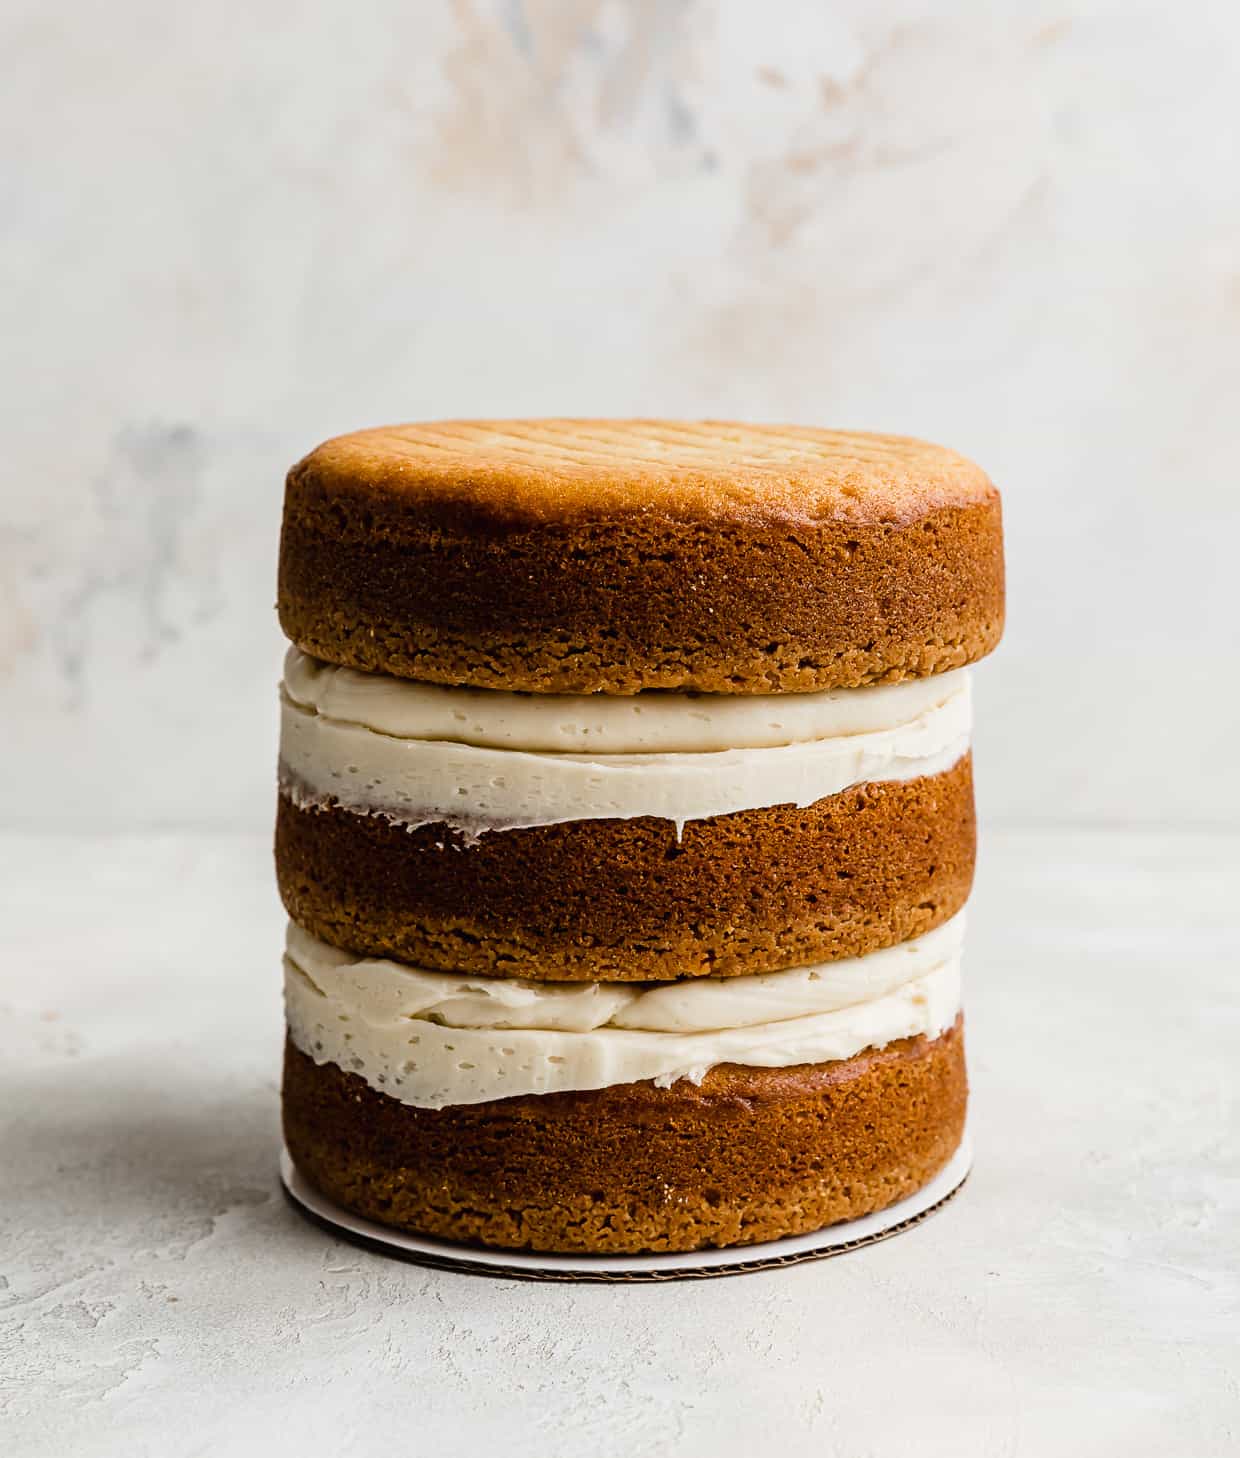 Three Golden Oreo cake layers stacked on top of each other against a white background.